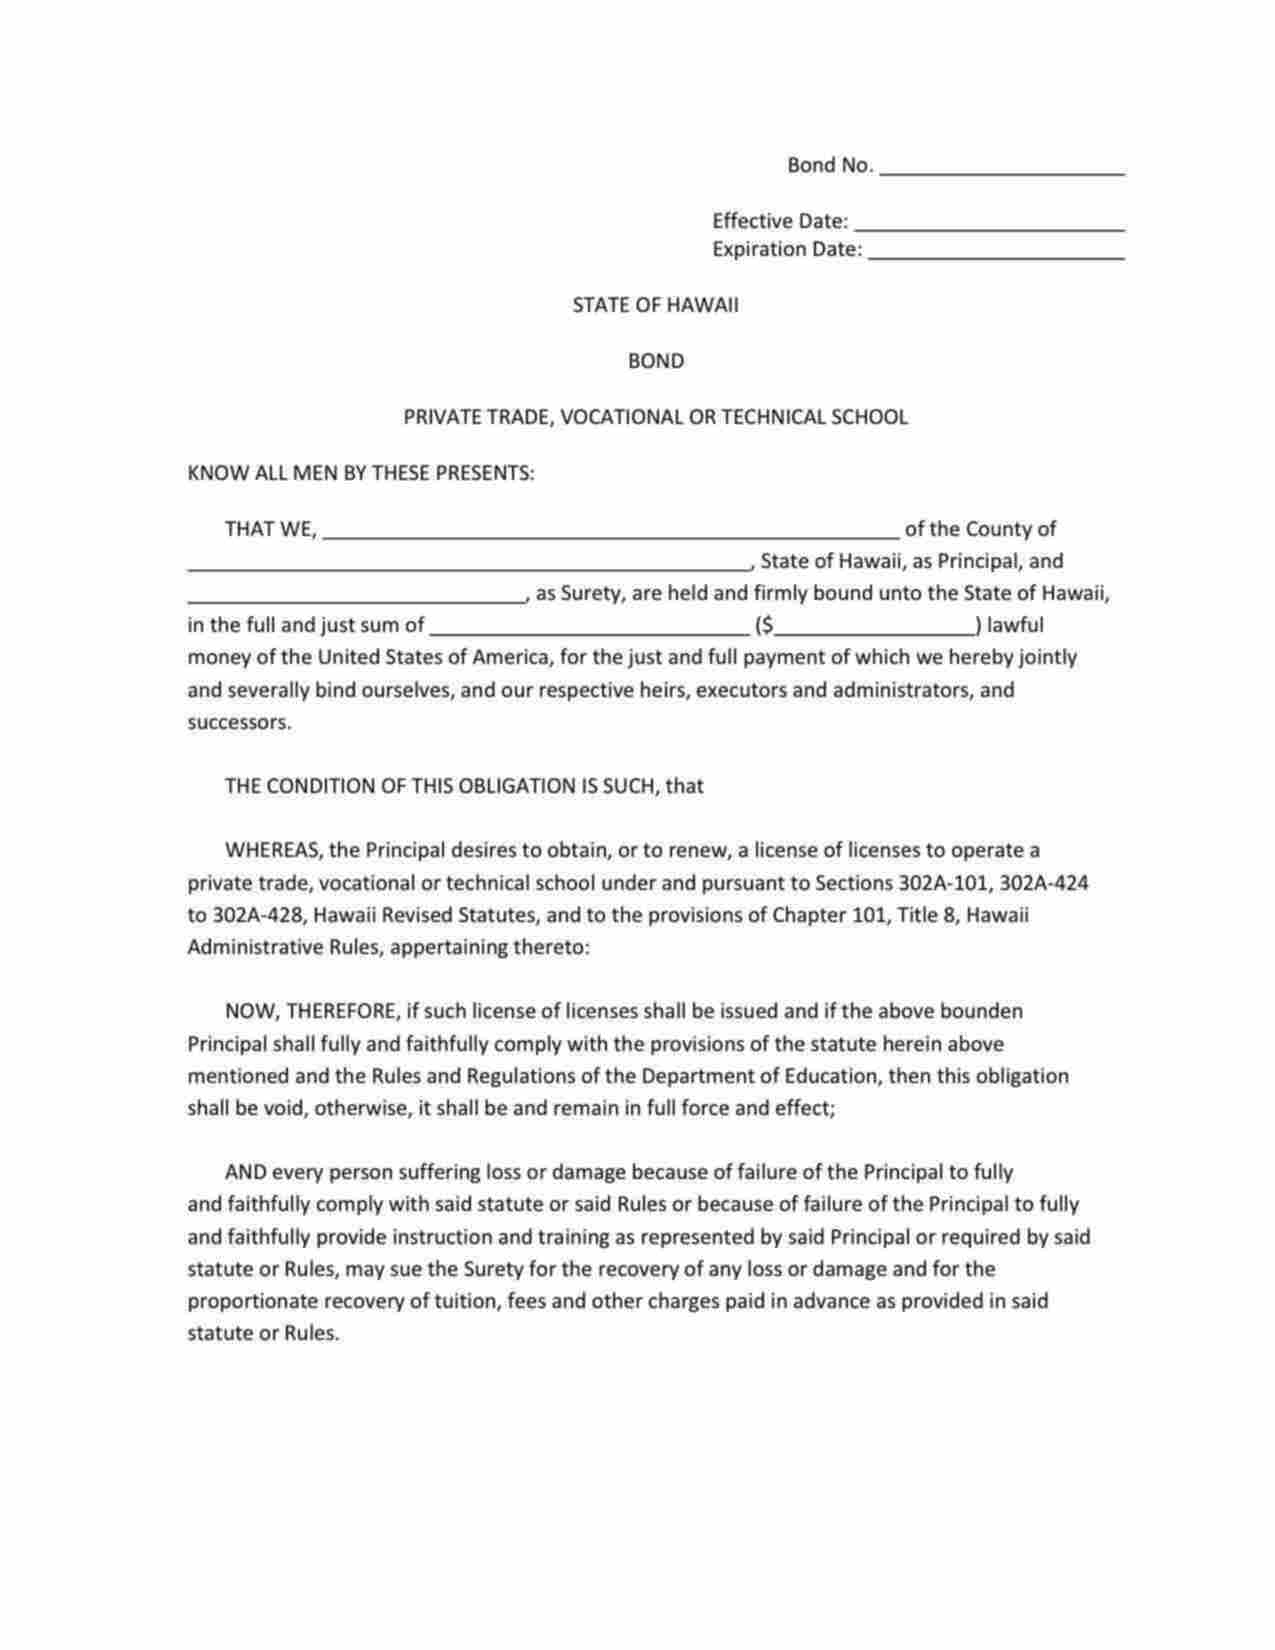 Hawaii Private Trade, Vocational or Technical School Bond Form